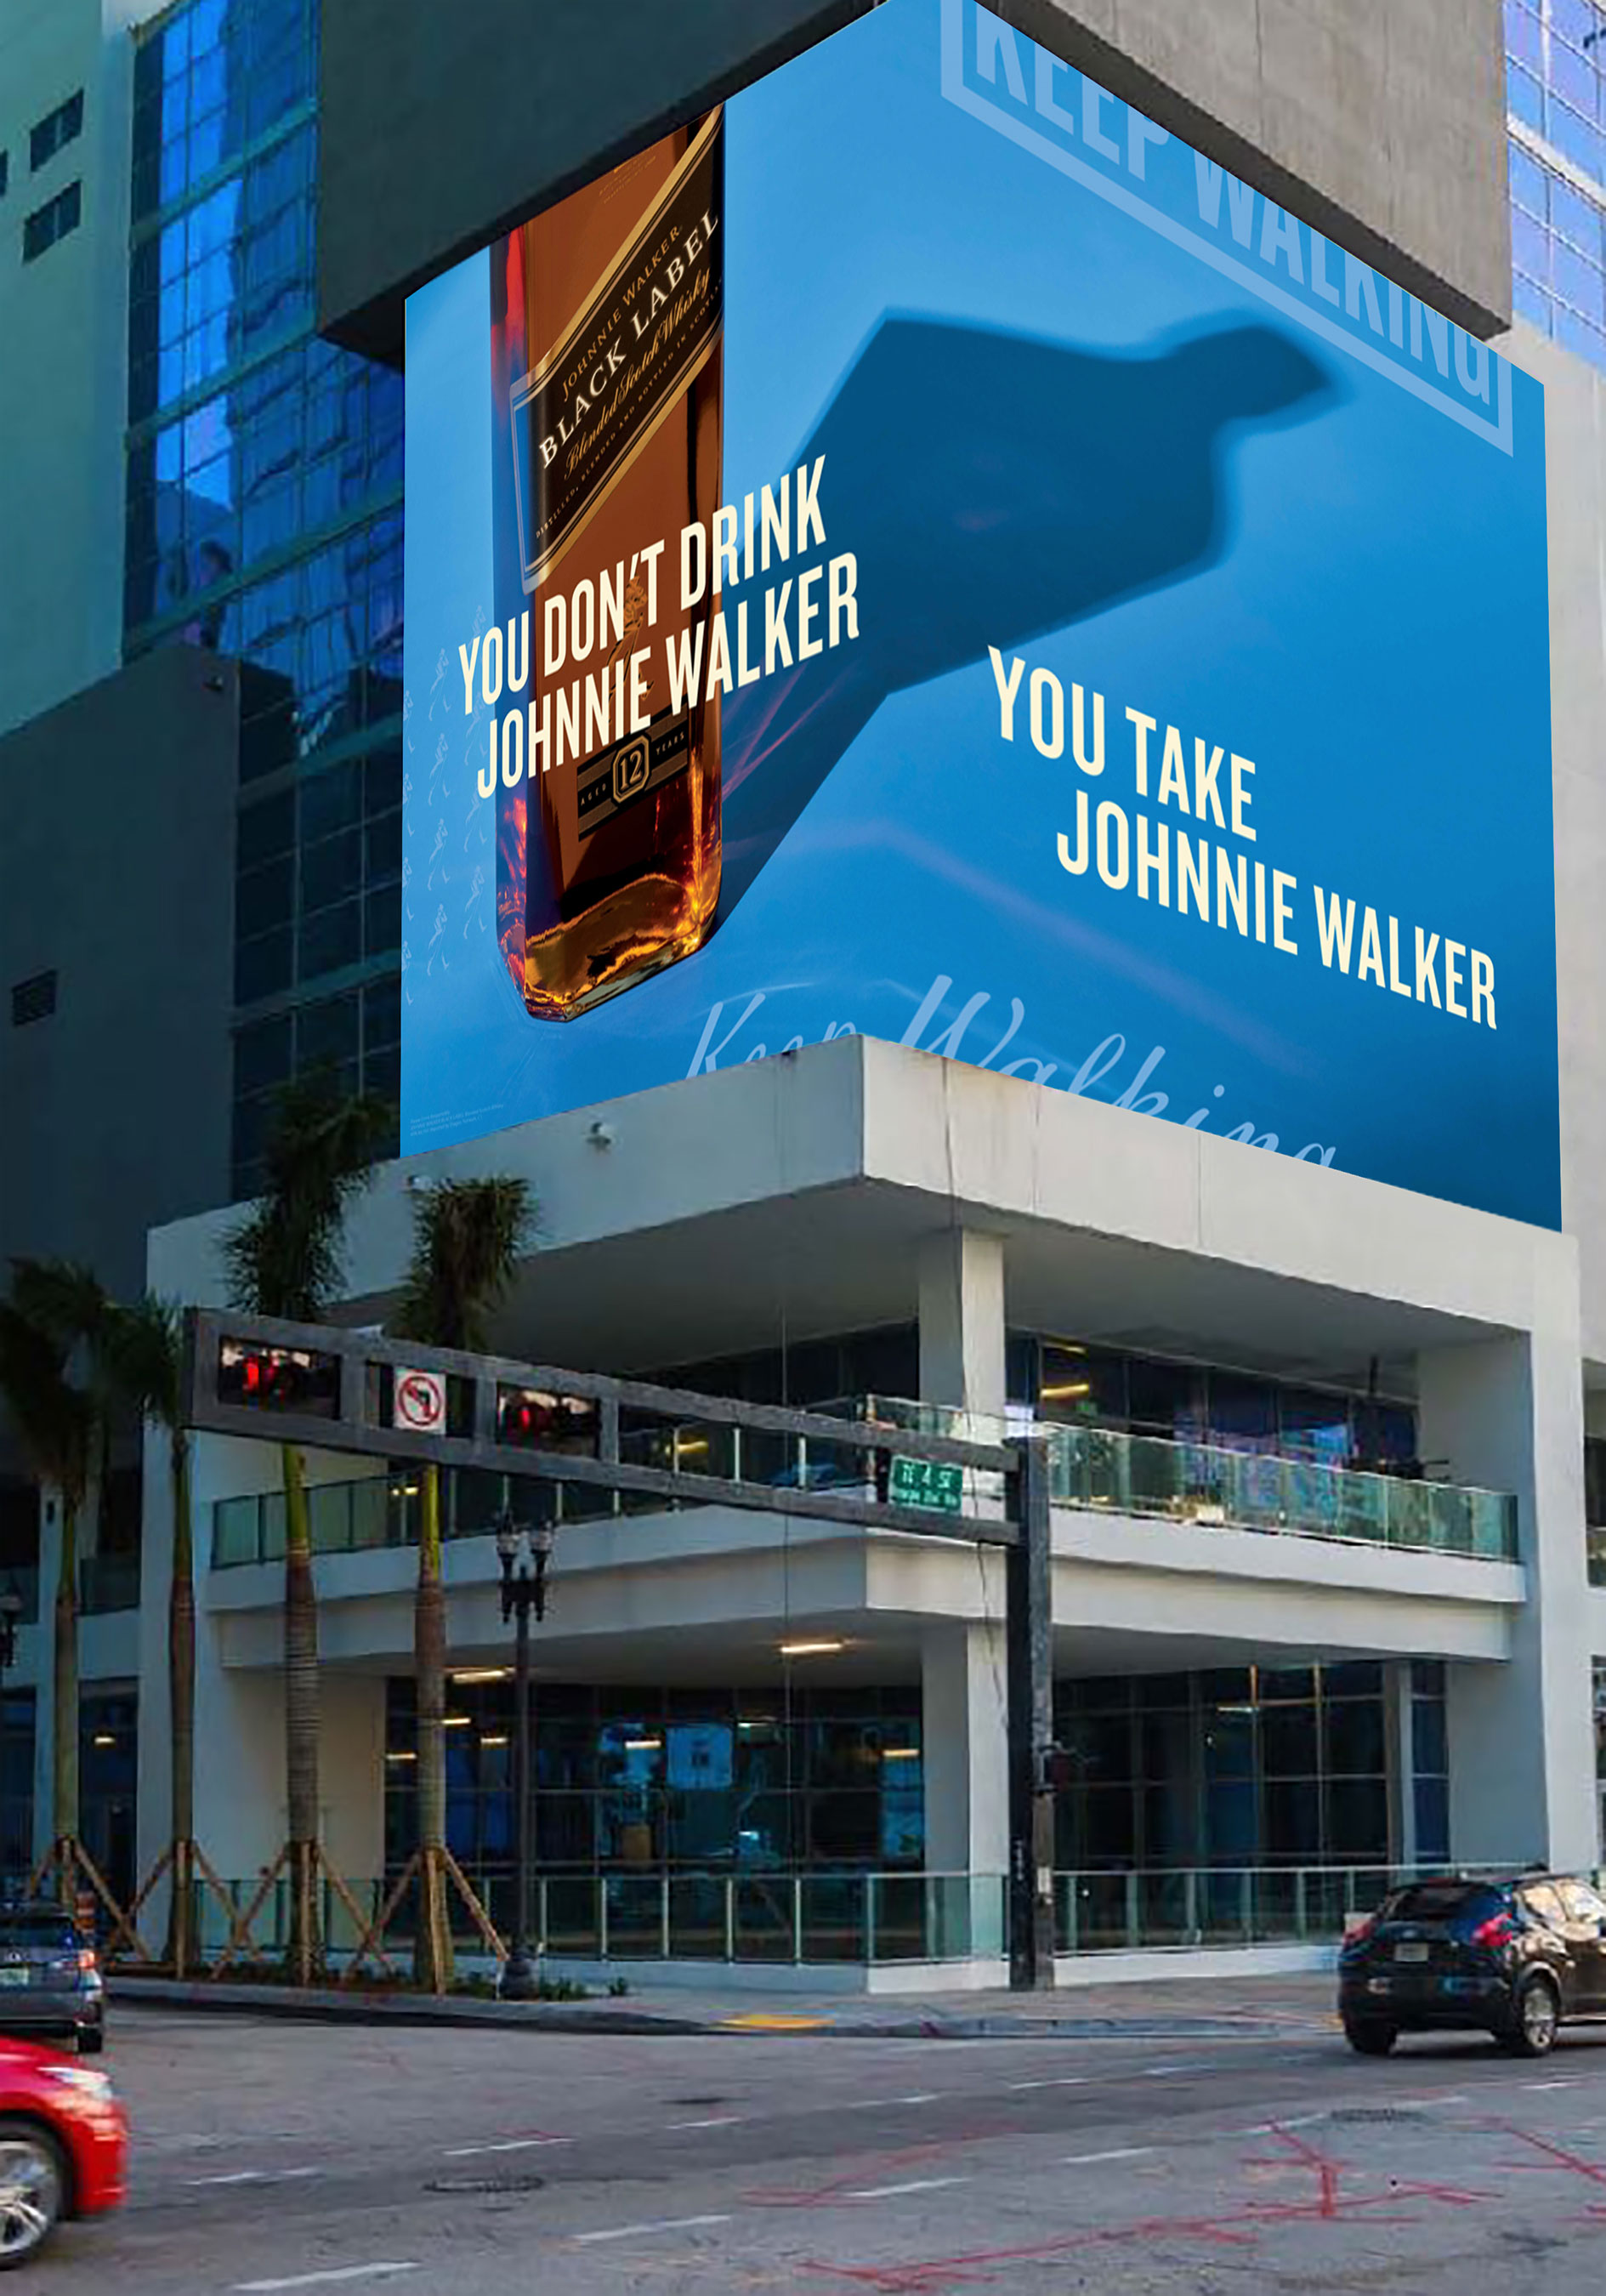 With its eye-catching patterns and brilliant colors, the new Johnnie Walker ad creative will be displayed across U.S.